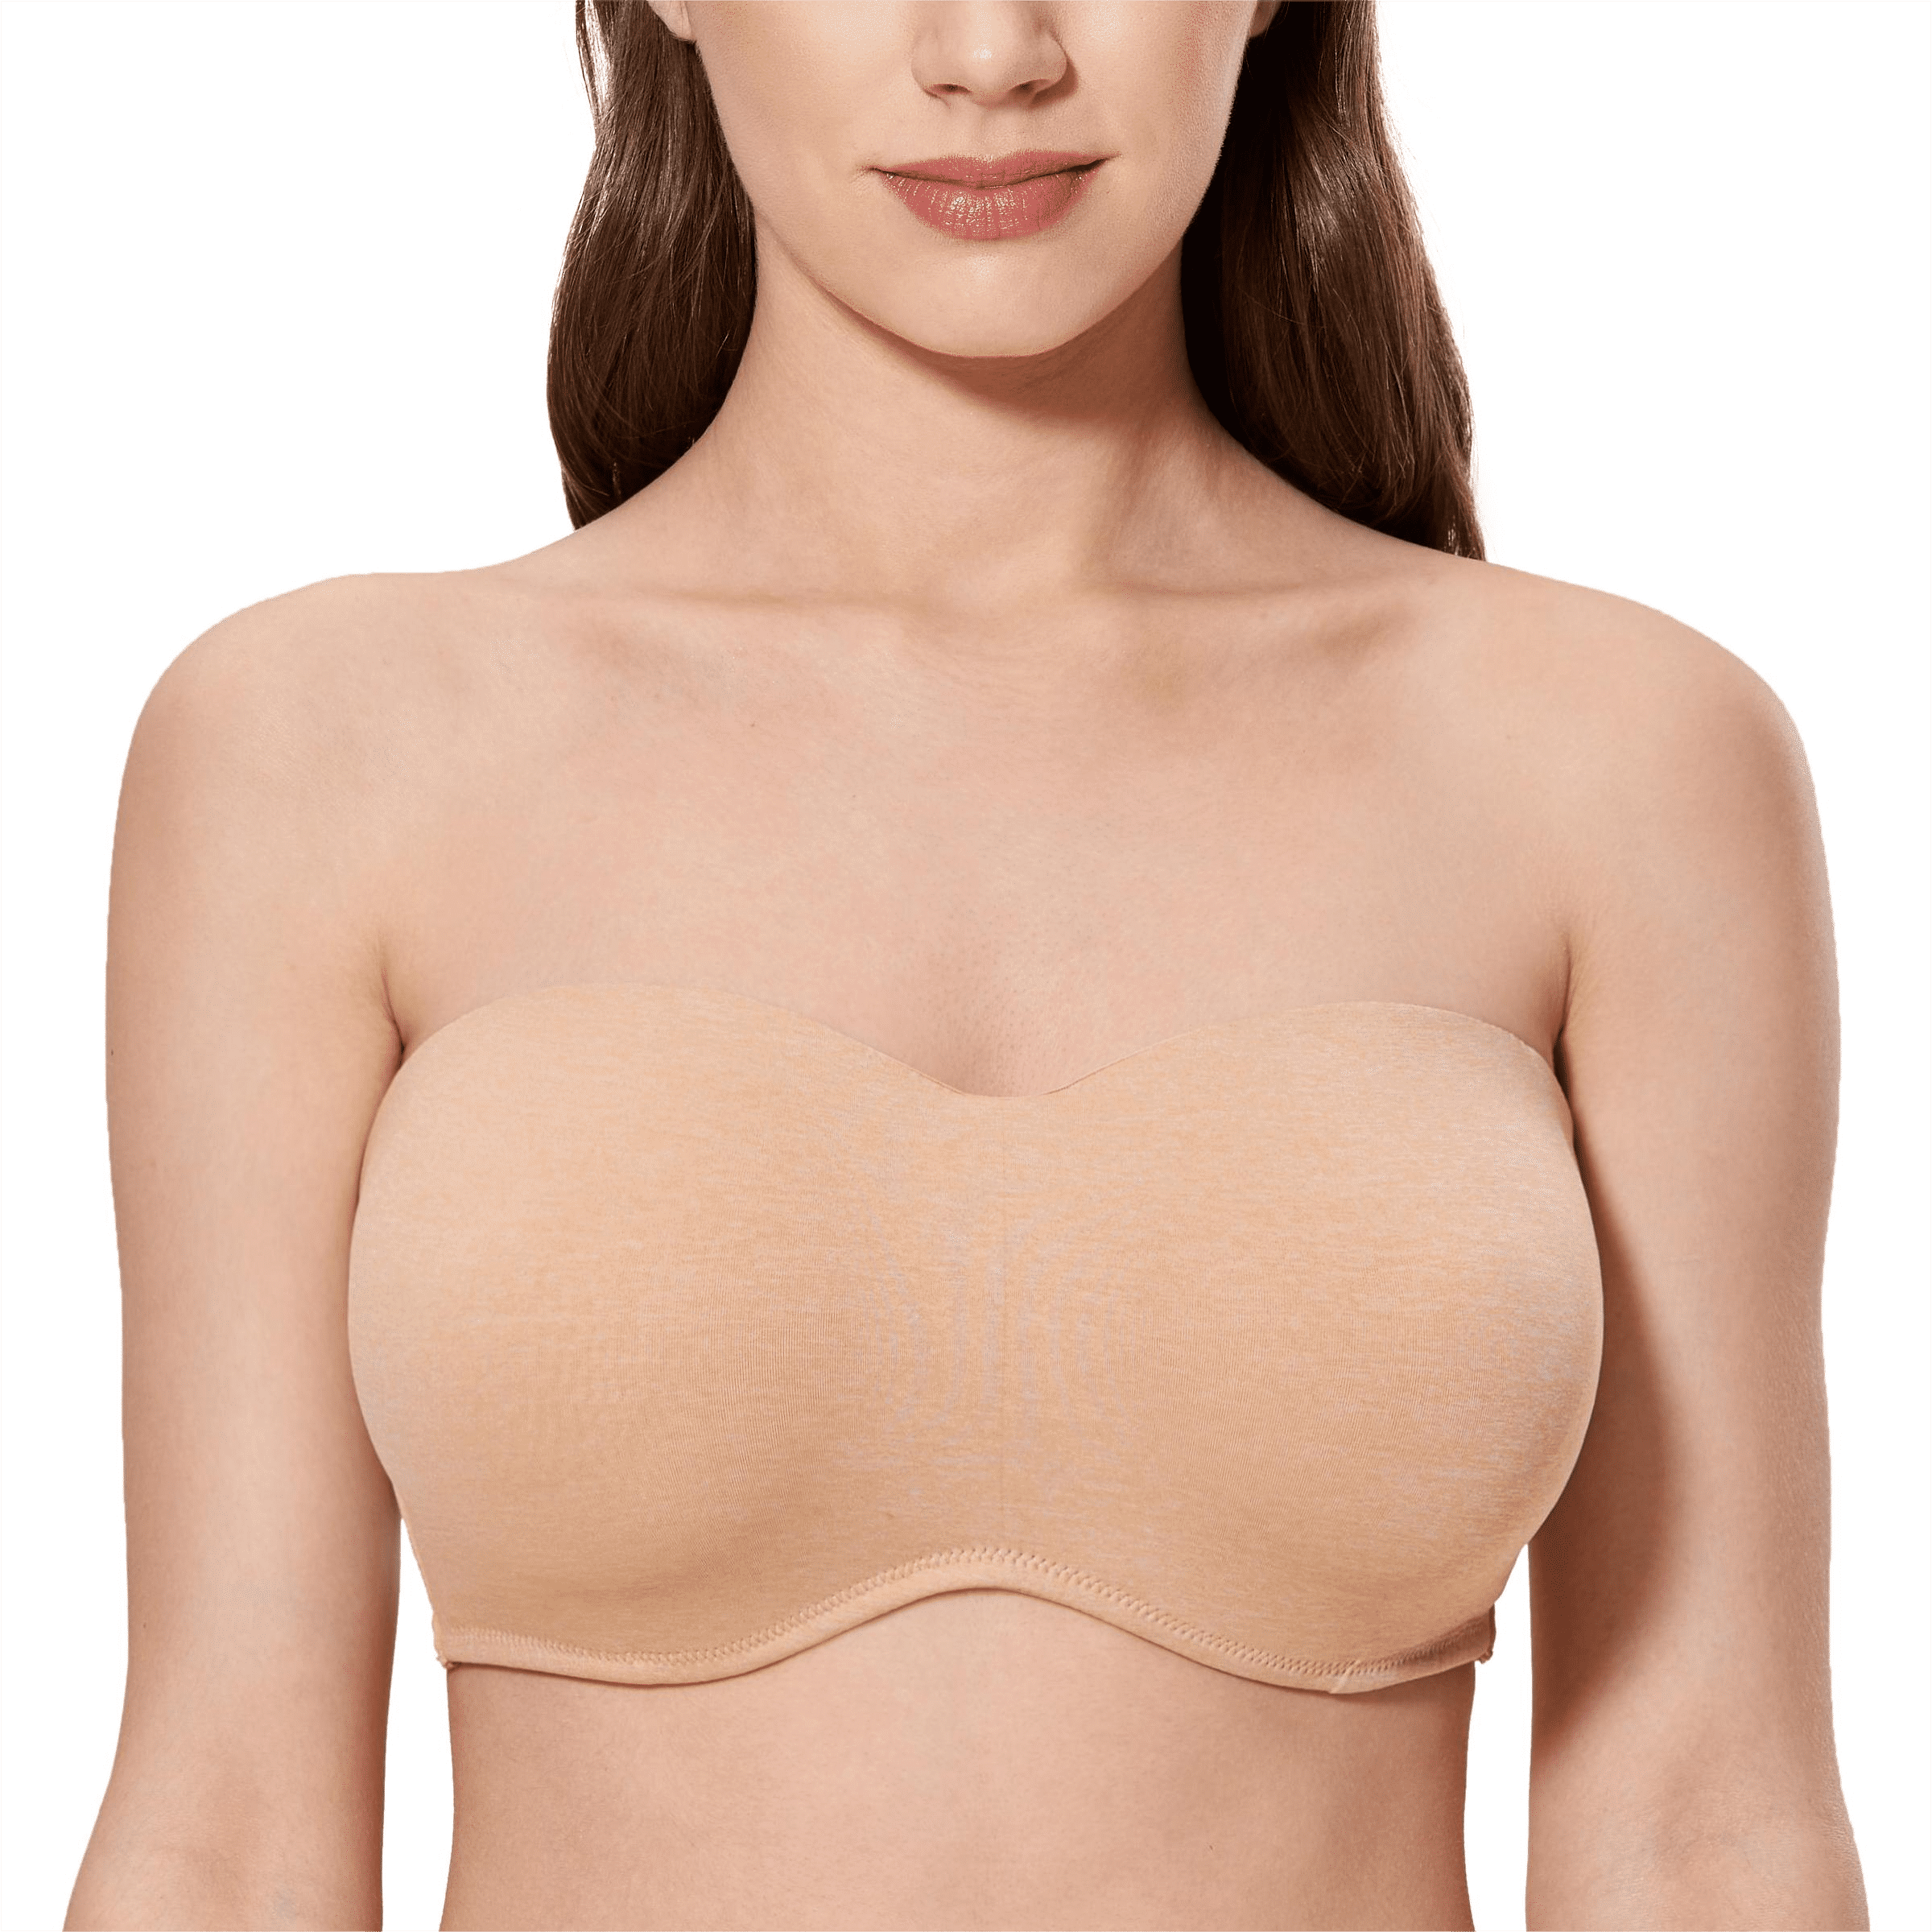 AILIVIN Strapless Bra for Women Underwire Support Bandeau Unlined Seamless  Minimizer Womens Bras